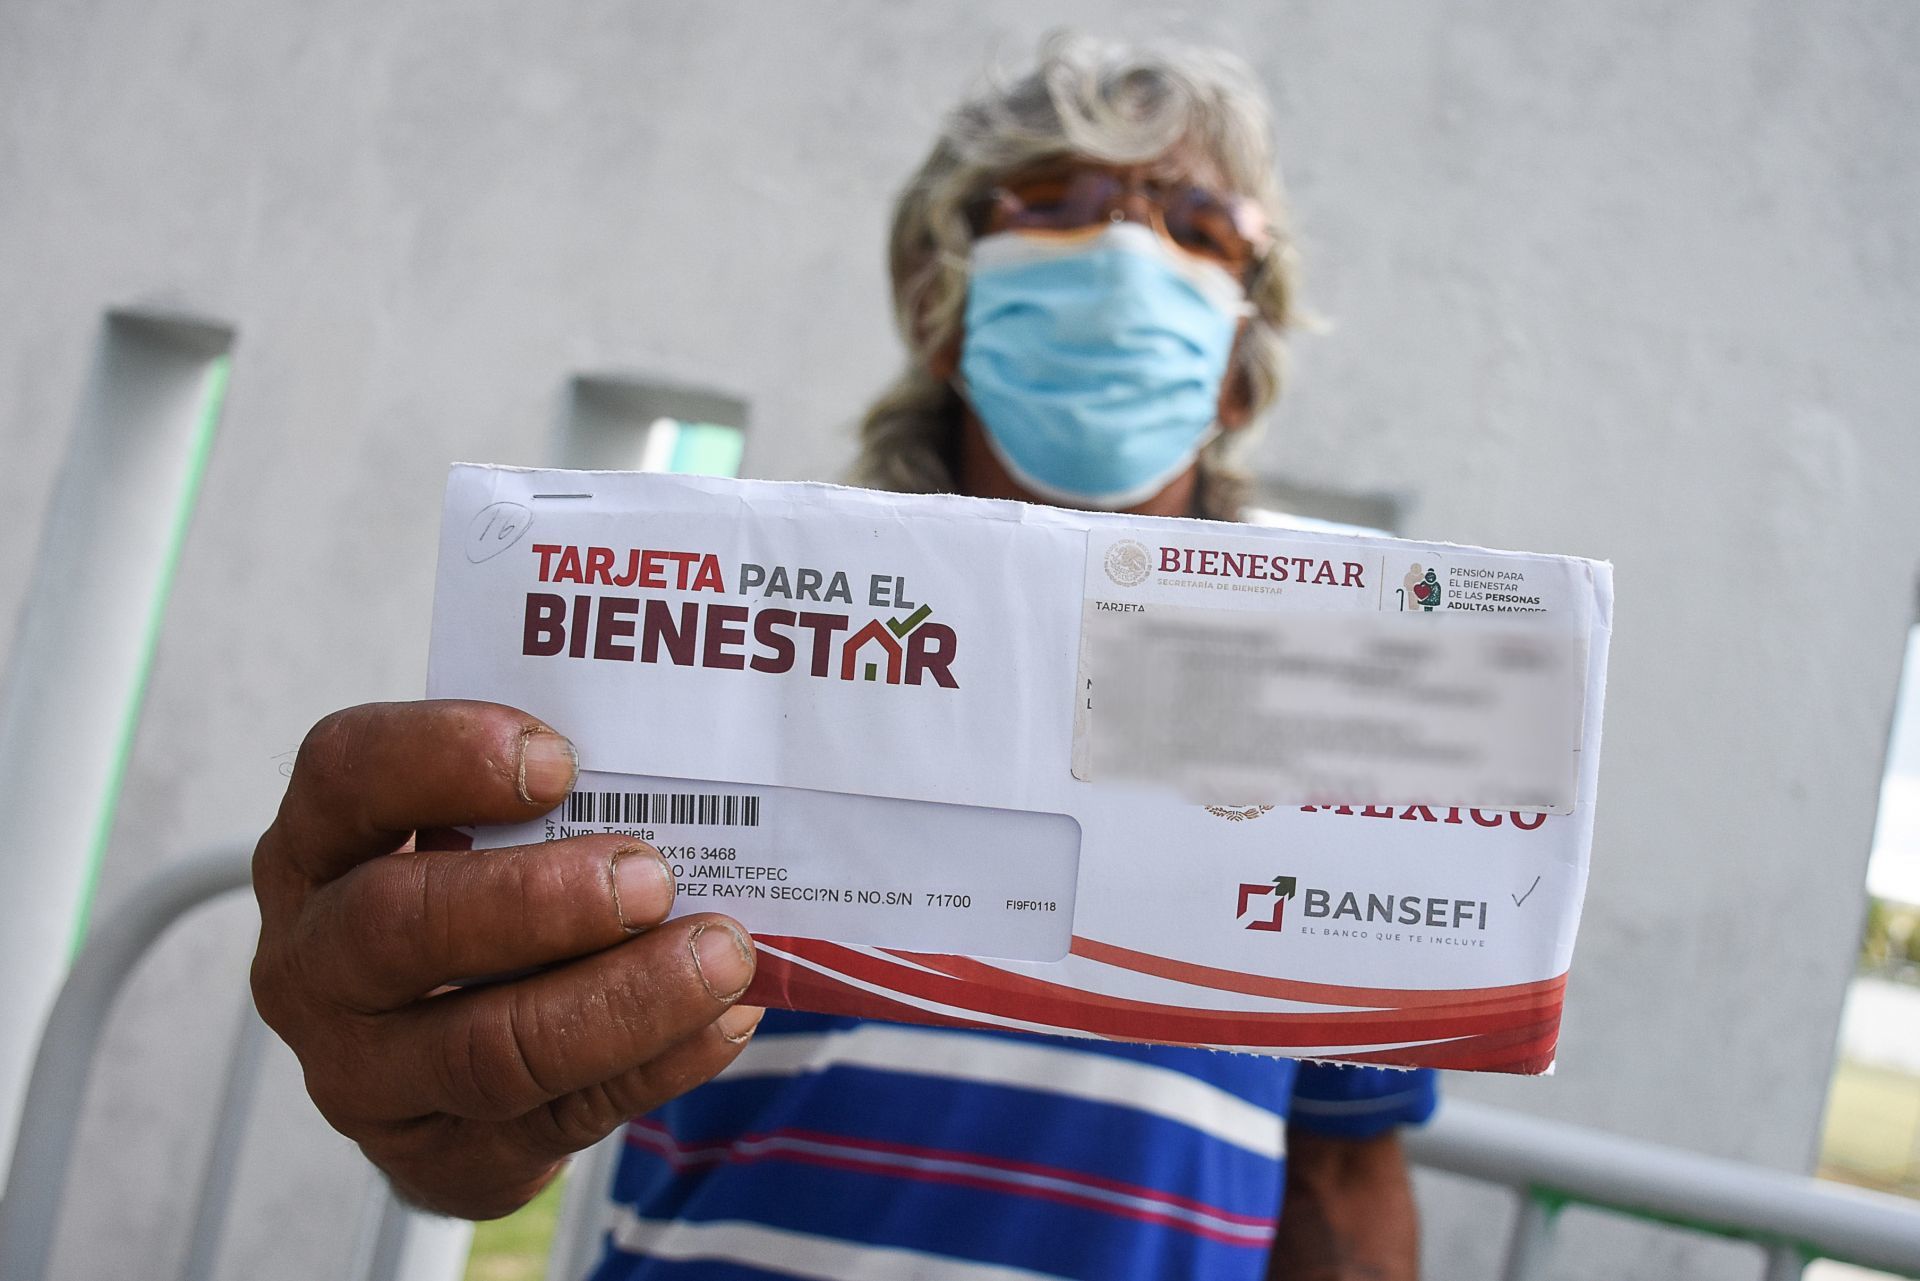 Changes of welfare pension cards in CDMX